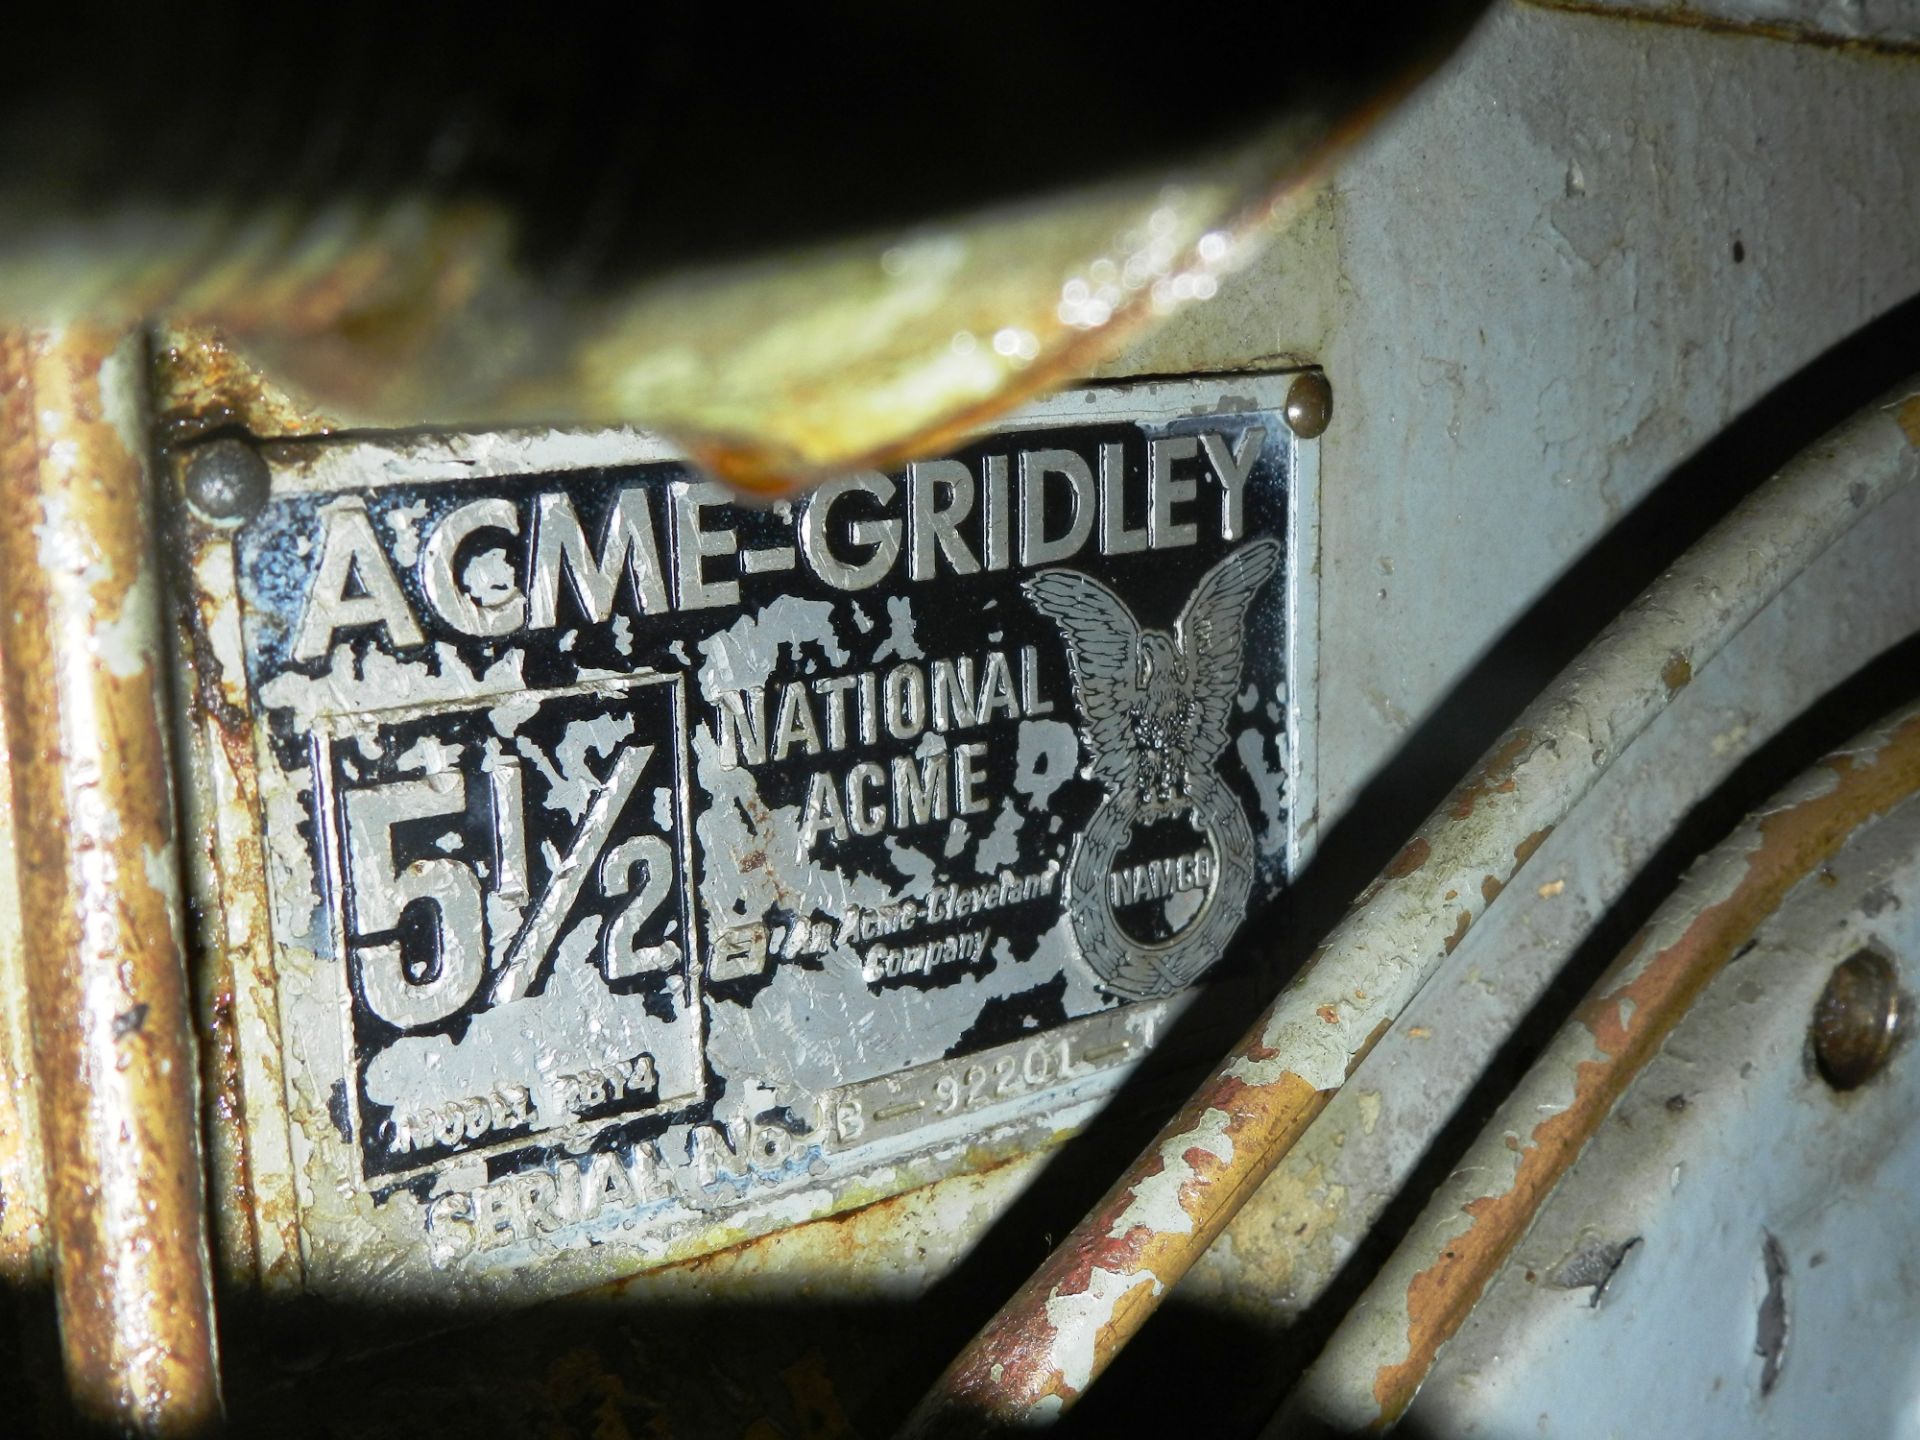 Acme Gridley 5-1/2" Screw Machine RBT-4 w/ Tooling - Image 8 of 8